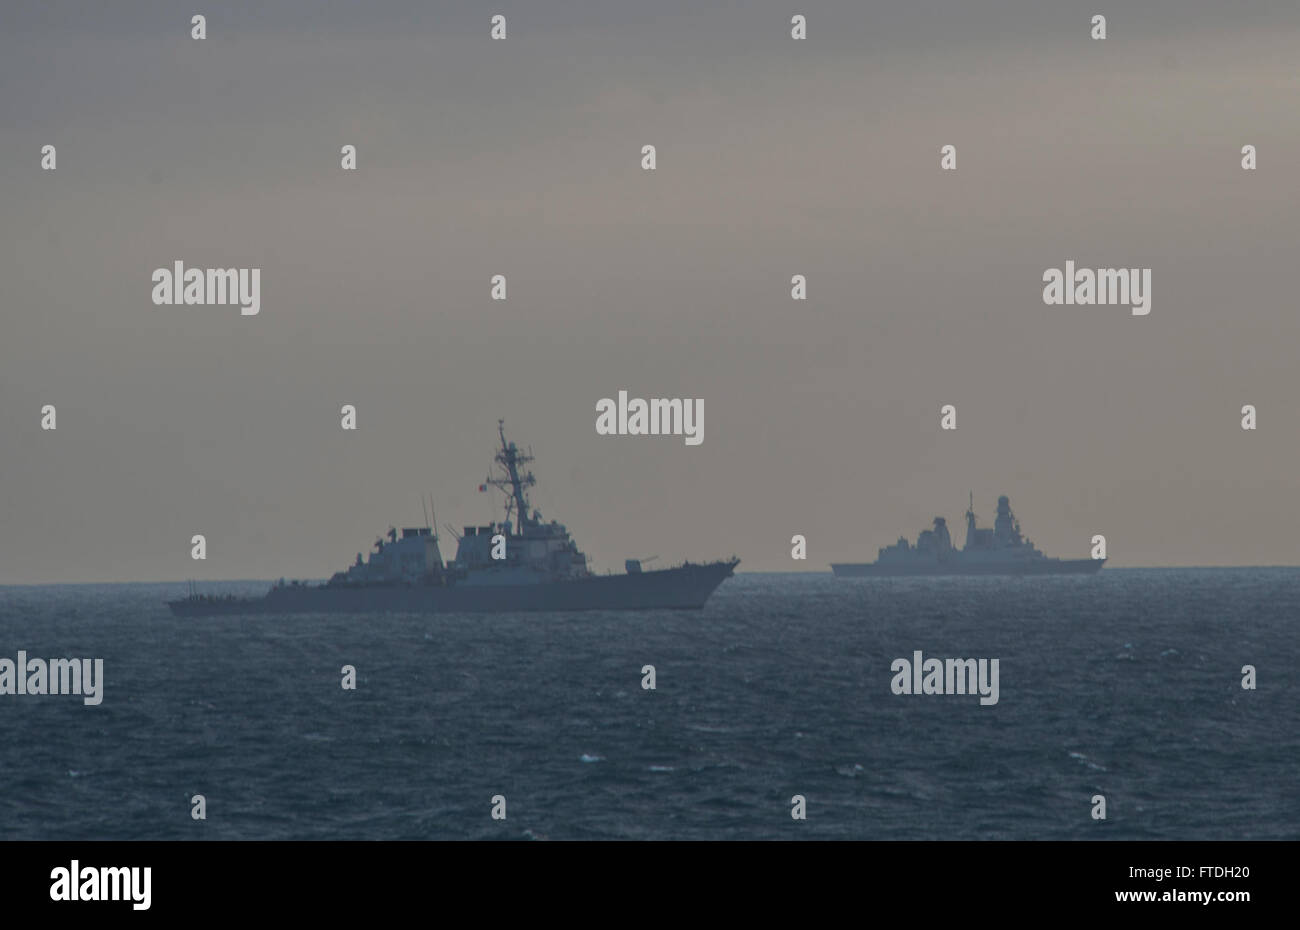 151022-N-OX430-086 ATLANTIC OCEAN (Oct. 22, 2015) Arleigh Burke-class guided-missile destroyer USS Ross (DDG 71) and 2 Andrea Doria-class Italian destroyer DDGHM Andrea Doria transit with guided-missile destroyer USS The Sullivans (DDG 68) during At Sea Demonstration 2015 (ASD 15) Oct. 22, 2015. The Sullivans is participating in ASD 15, which is a U.K.-hosted, U.S.-facilitated, multi-national demonstration of coalition integrated air and missile defense capability. (U.S. Navy photo by Mass Communication Specialist Seaman Daniel Gaither/Released) Stock Photo